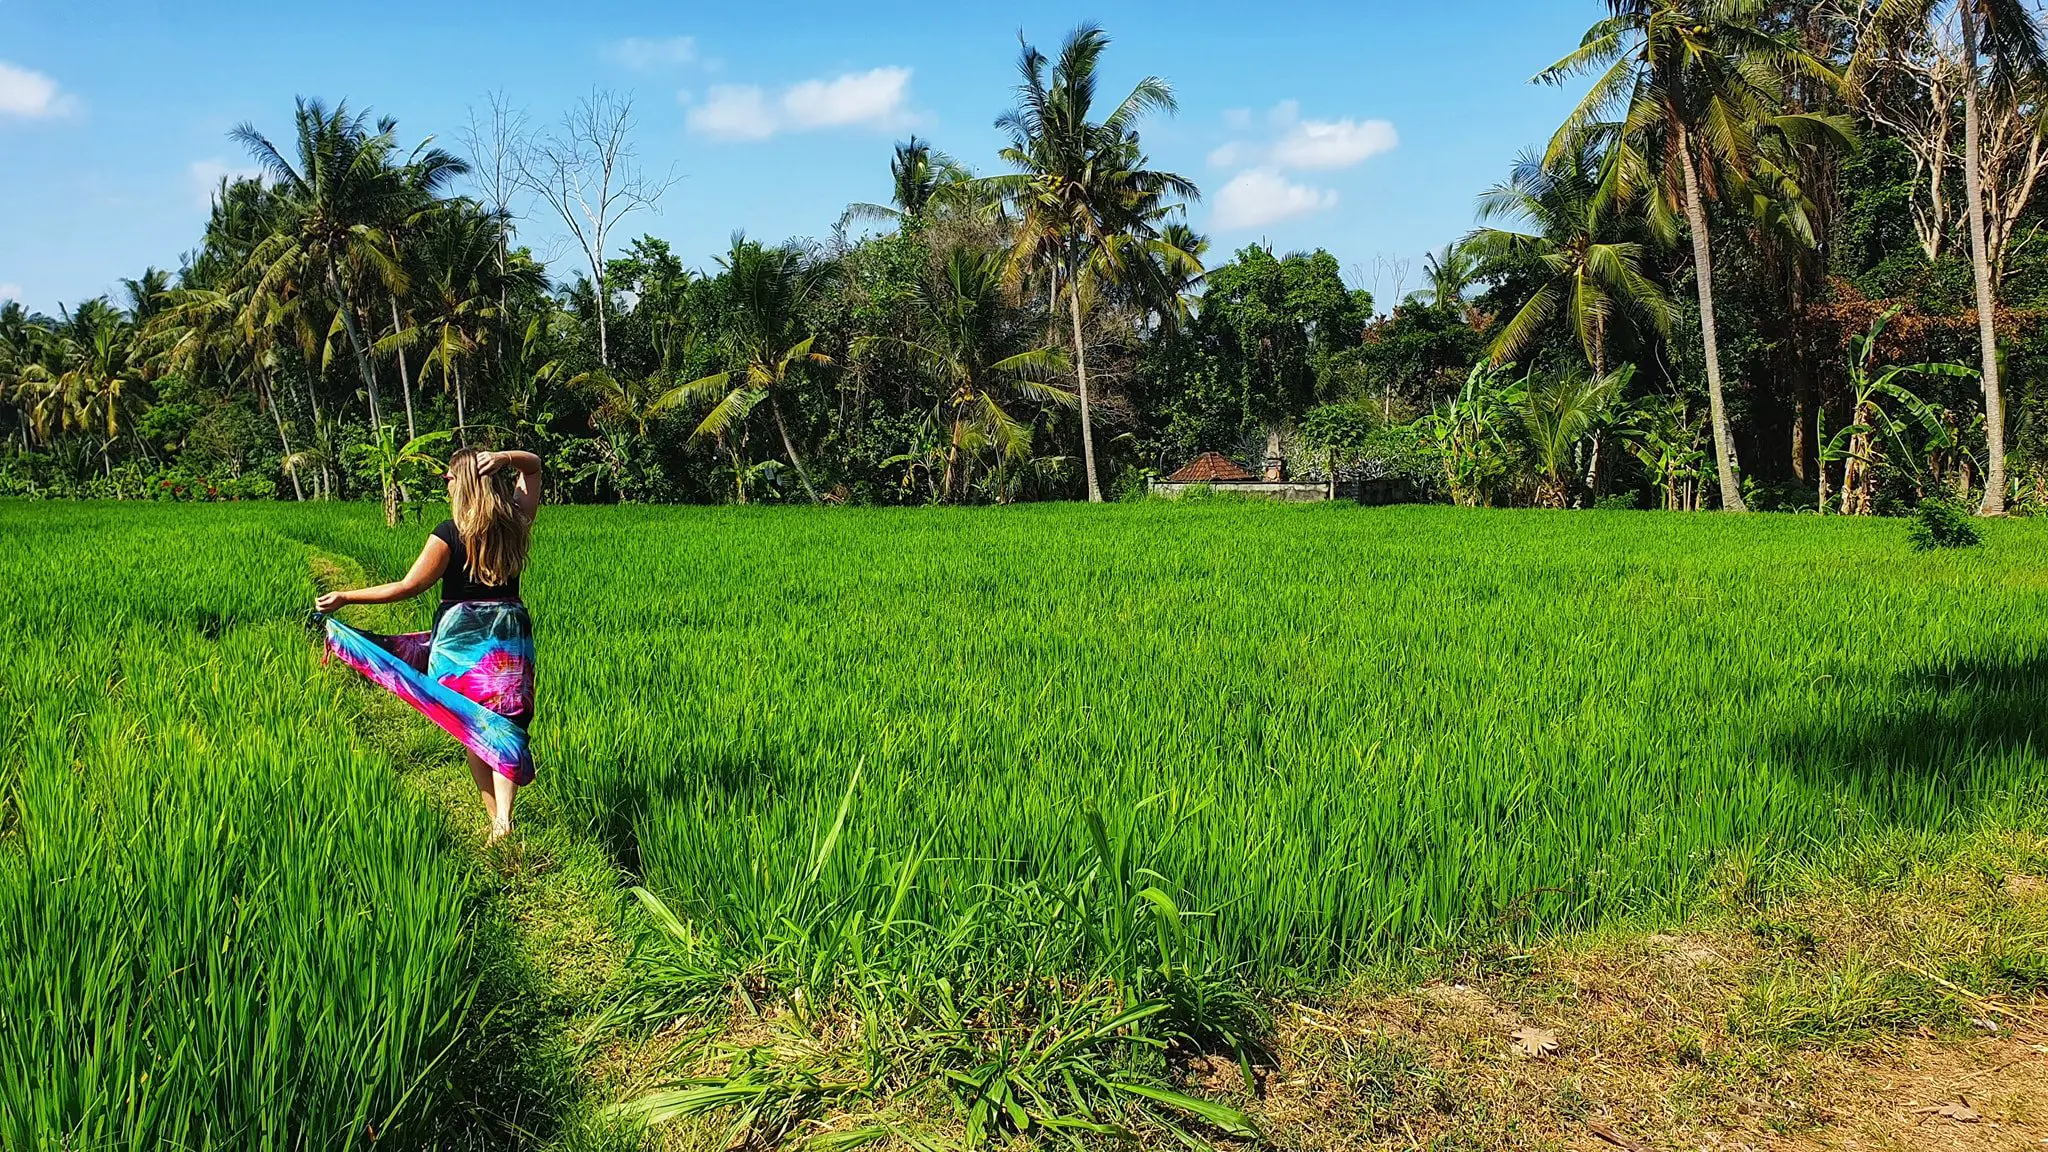 Things to do in Ubud